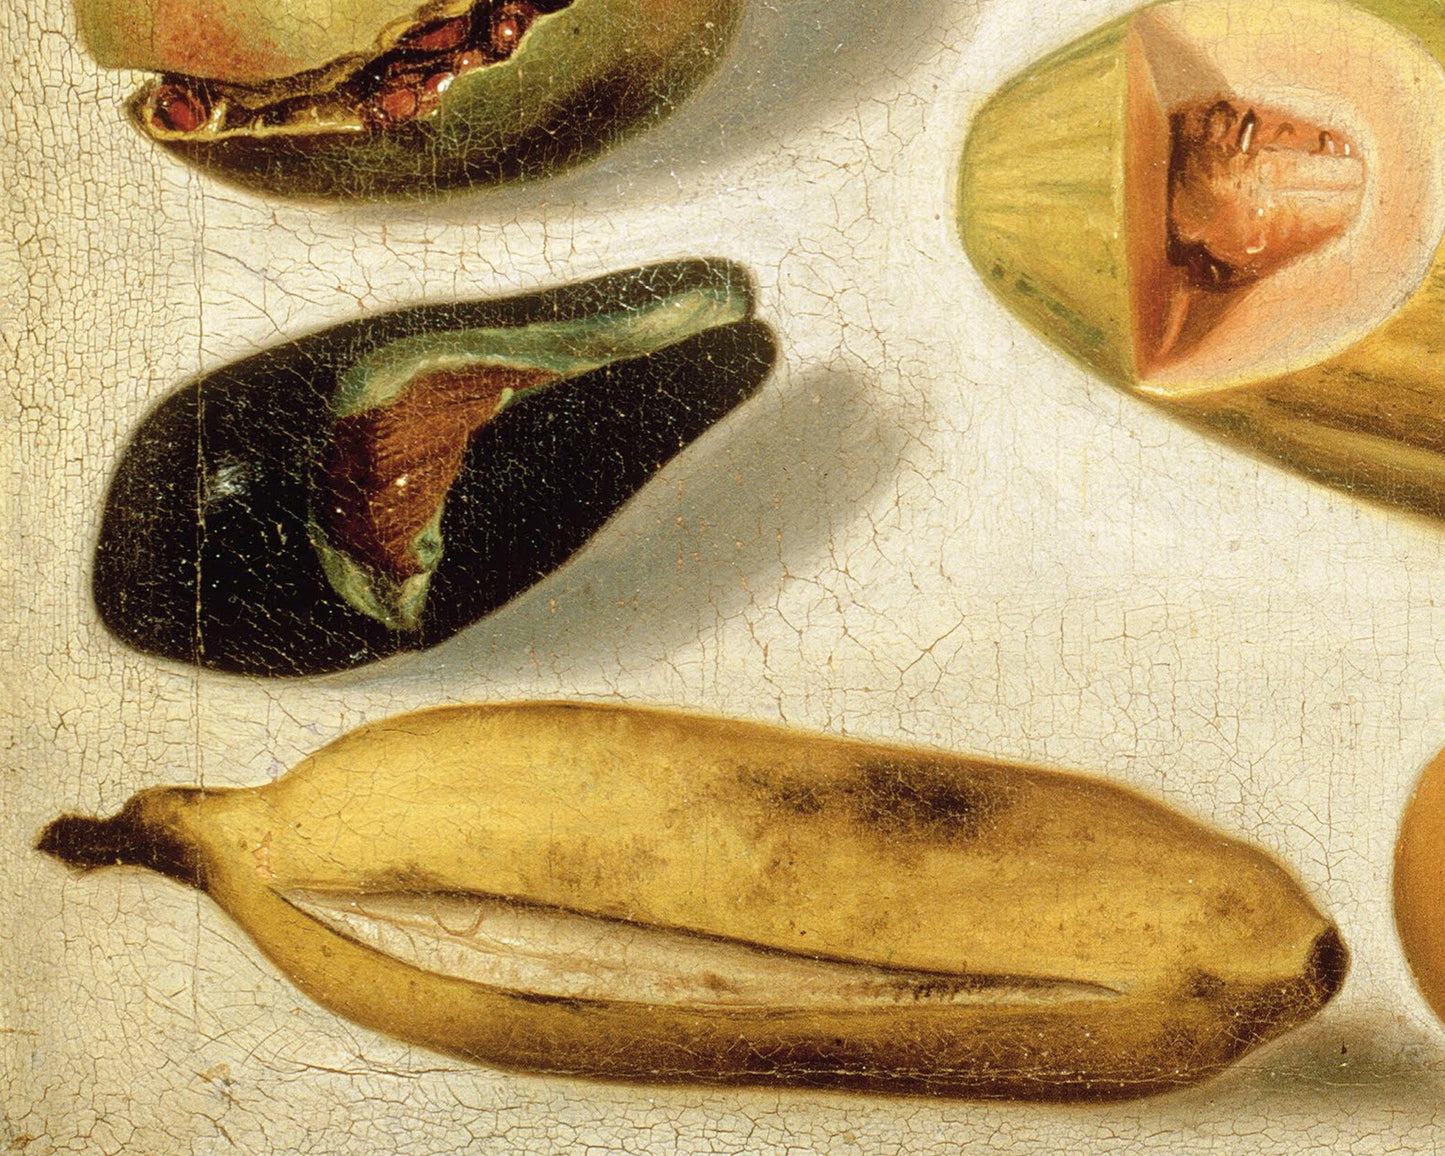 Still life with fruit (with scorpion and frog) by Hermenegildo Bustos (1874)